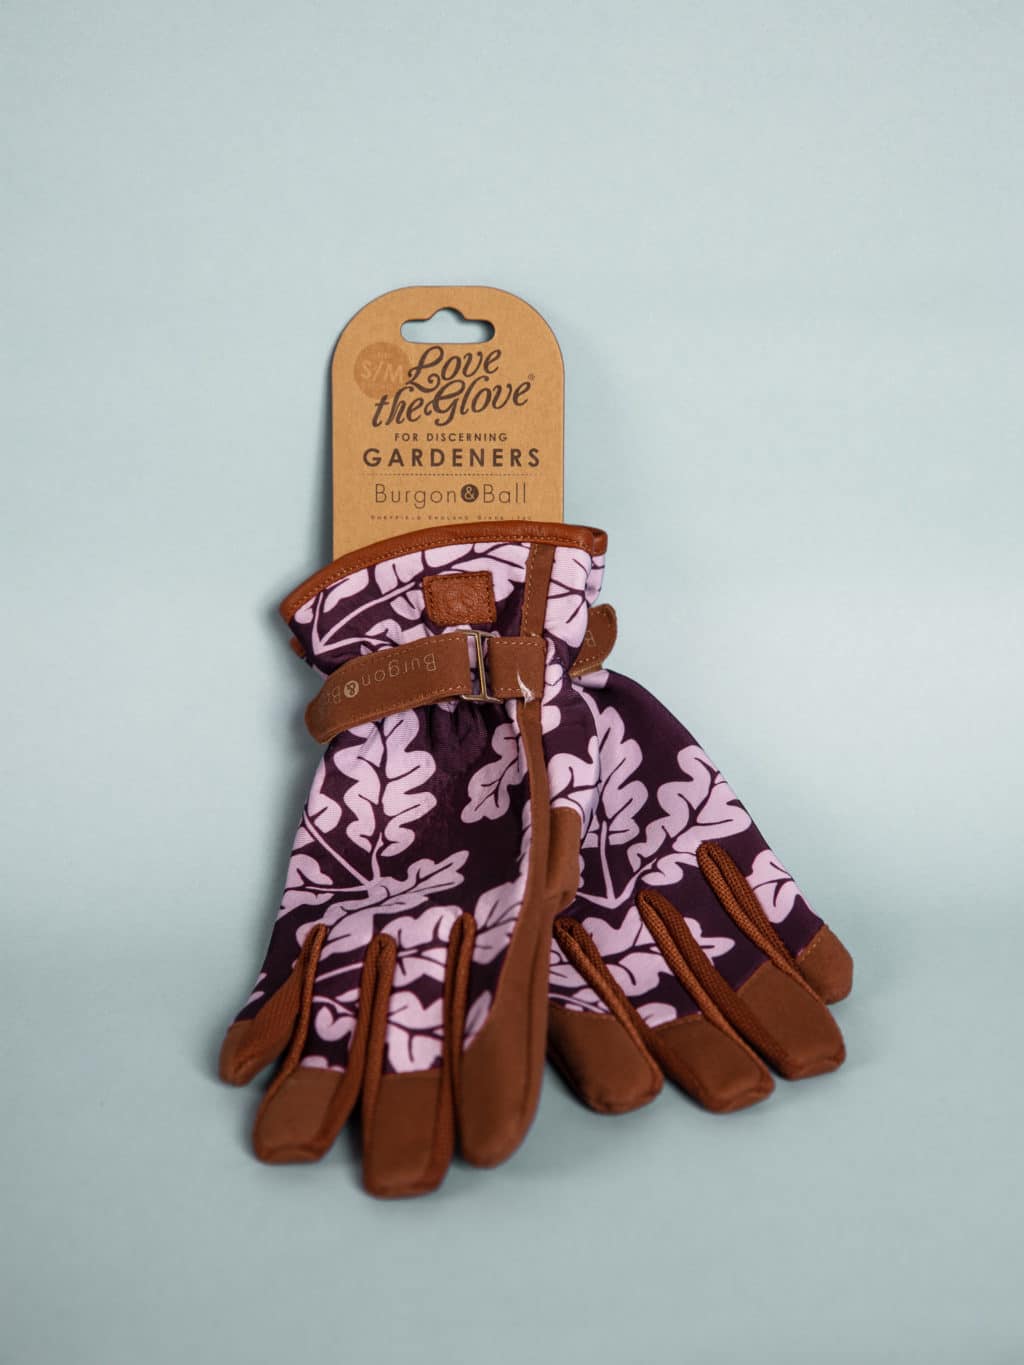 Purple Burgon and Ball gardening gloves. A beautiful gift at our boutique, Wagga Wagga florist shop.